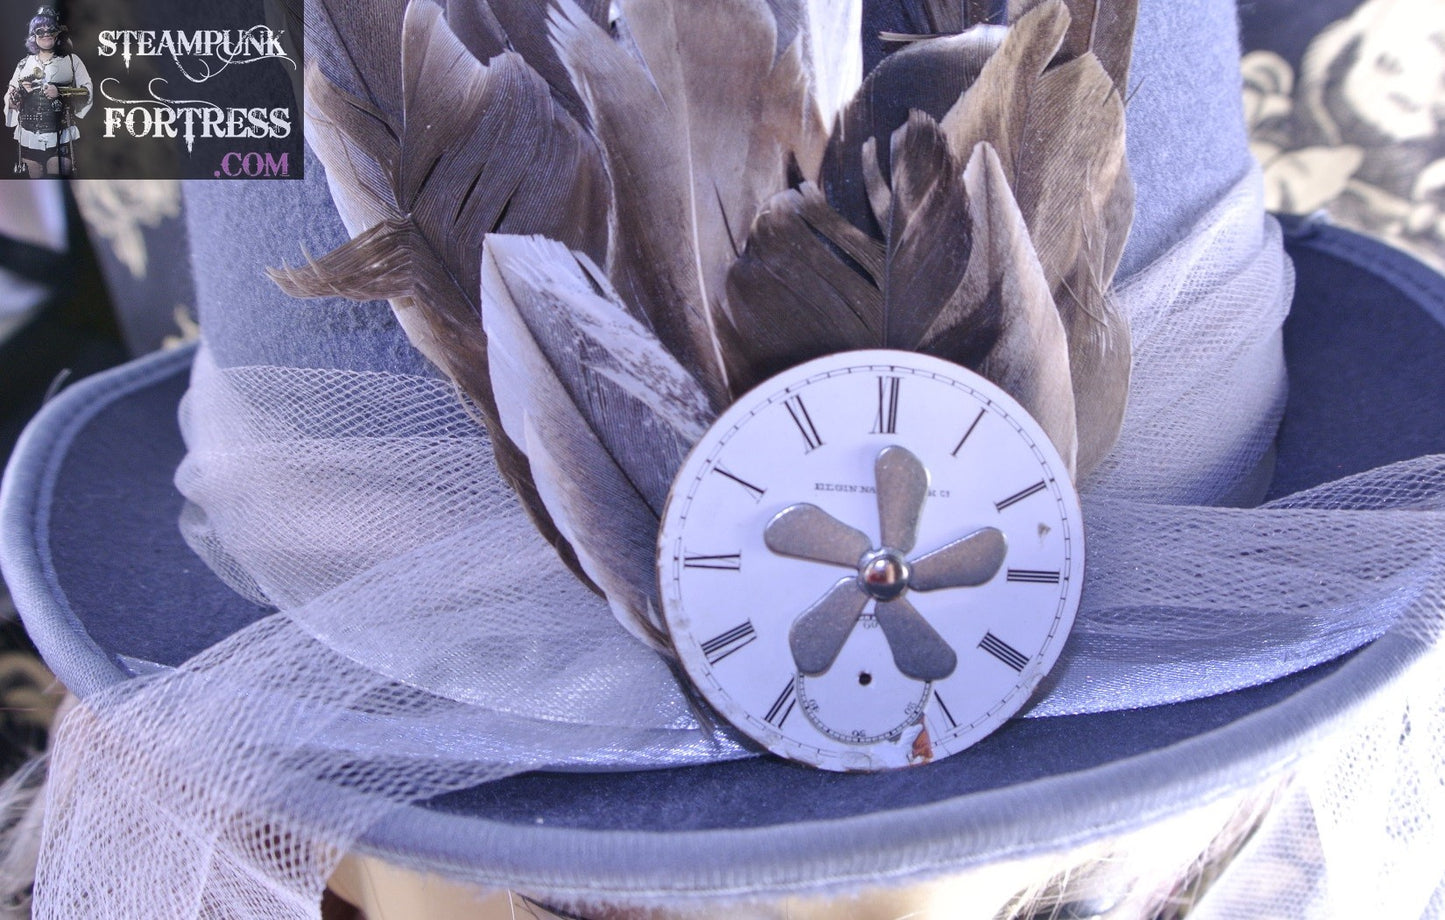 GREY GRAY DUCK FEATHERS ELGIN PORCELAIN AUTHENTIC GENUINE CLOCK WATCH FACE DIAL SILVER KINETIC SPINNING SPINS PROPELLER TULLE EXTRA LARGE XL VELOUR FULL SIZE TOP HAT STARR WILDE STEAMPUNK FORTRESS